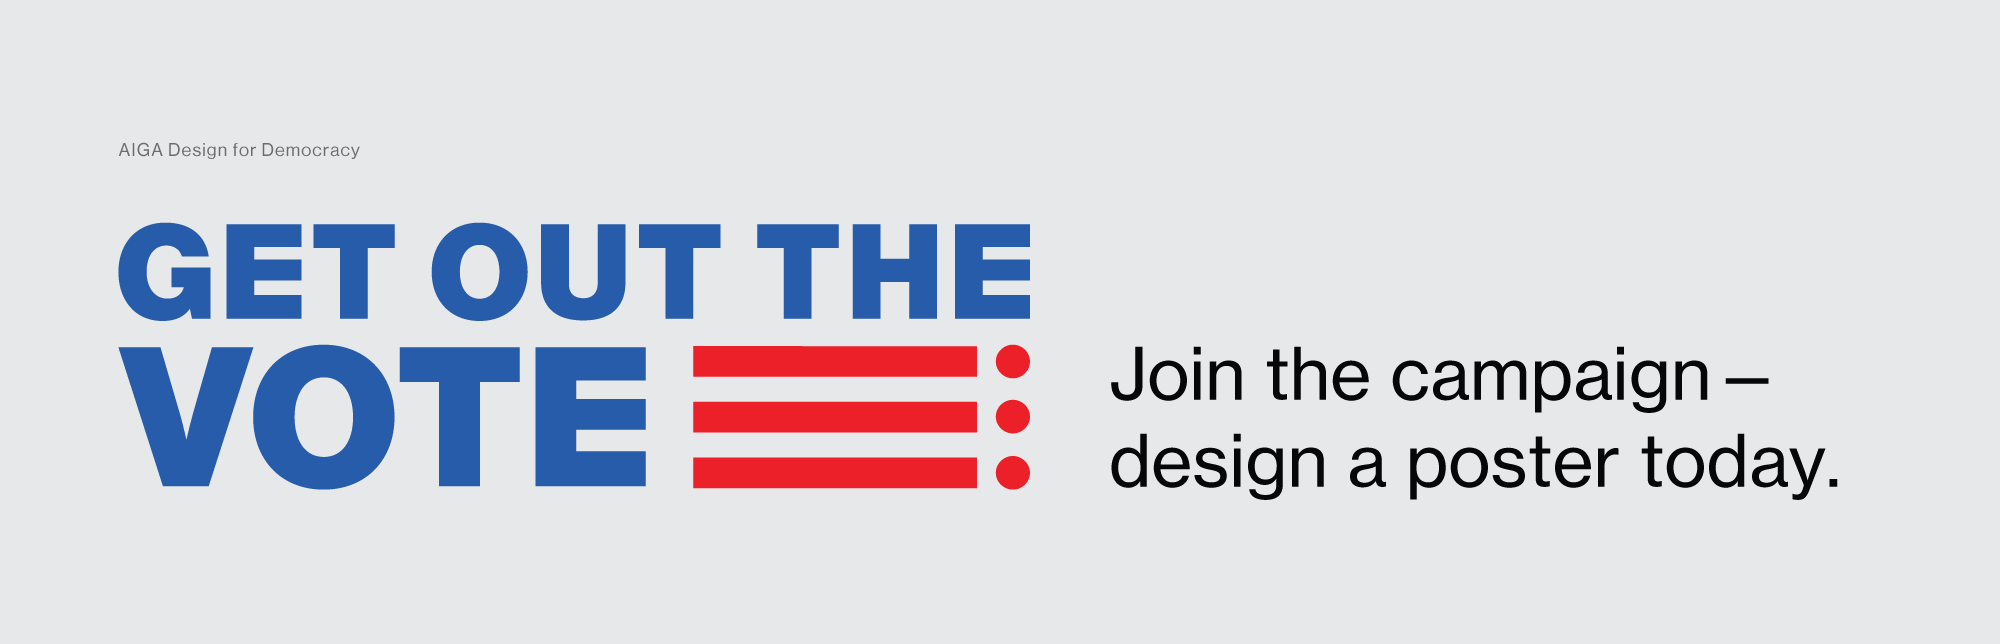 AIGA Design for Democracy Image with text "Get Out the Vote"